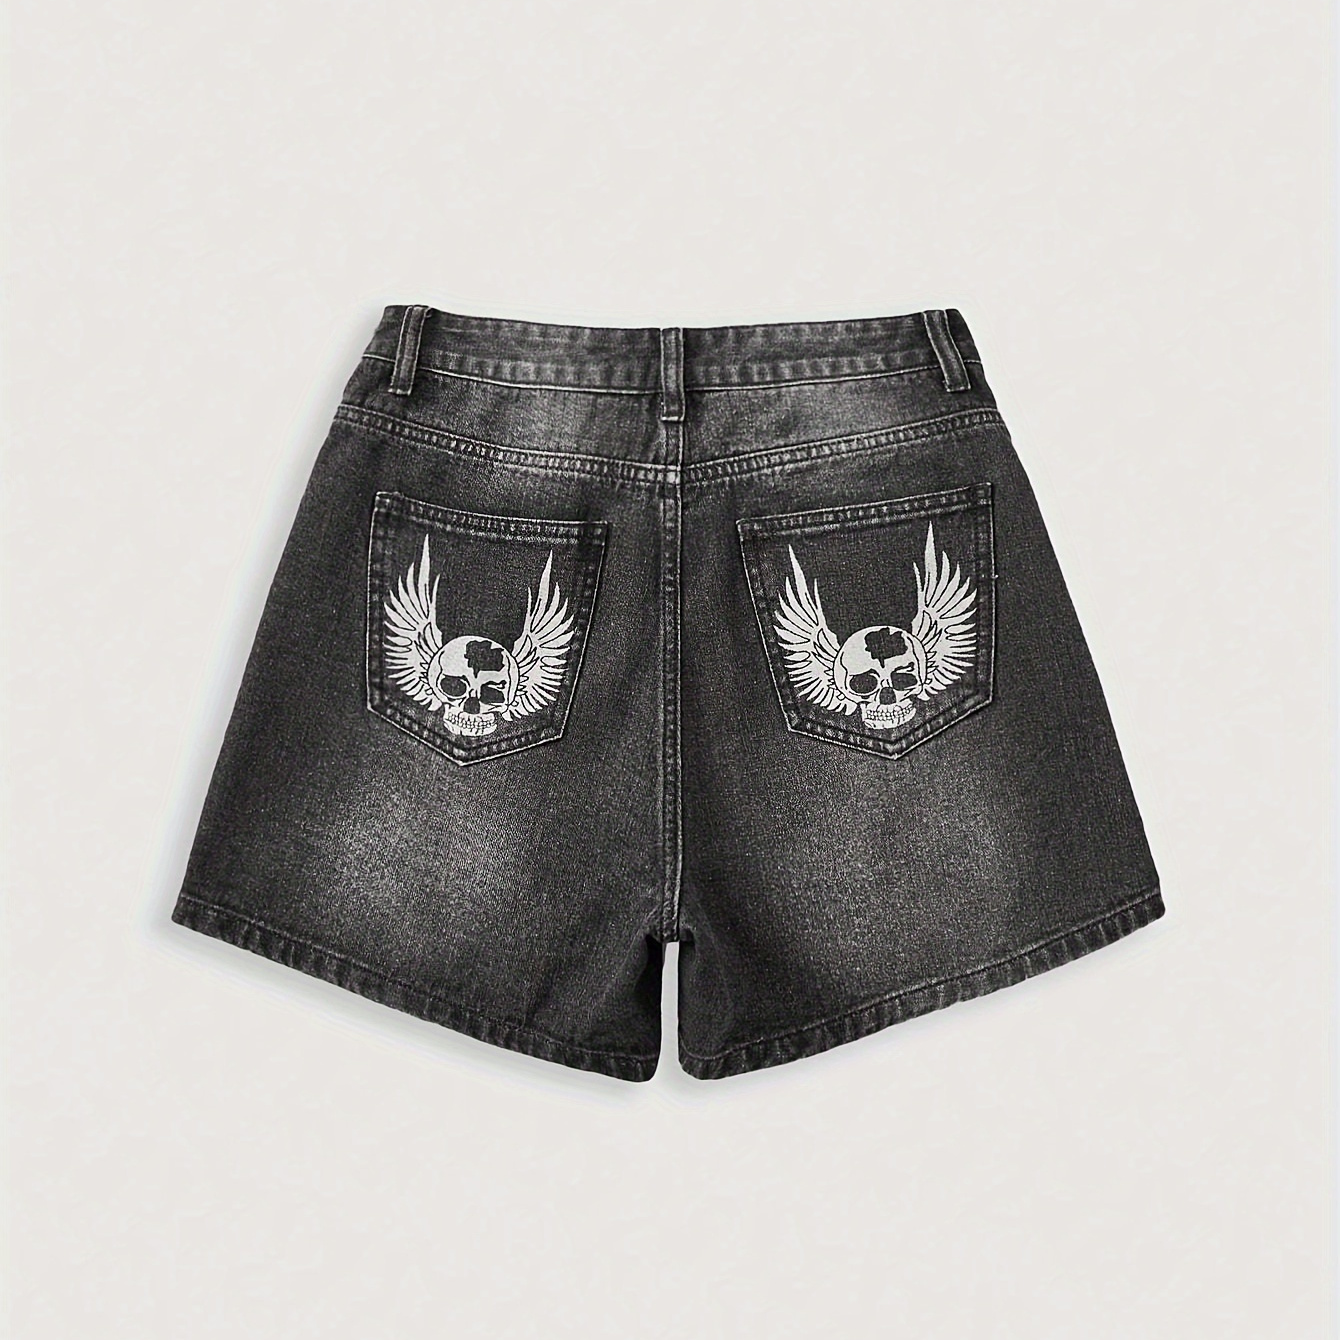 

Women's Elegant Denim Shorts - Skull And Wings Skull Embroidery, Classic Casual Summer Fashion, Zip Button Closure